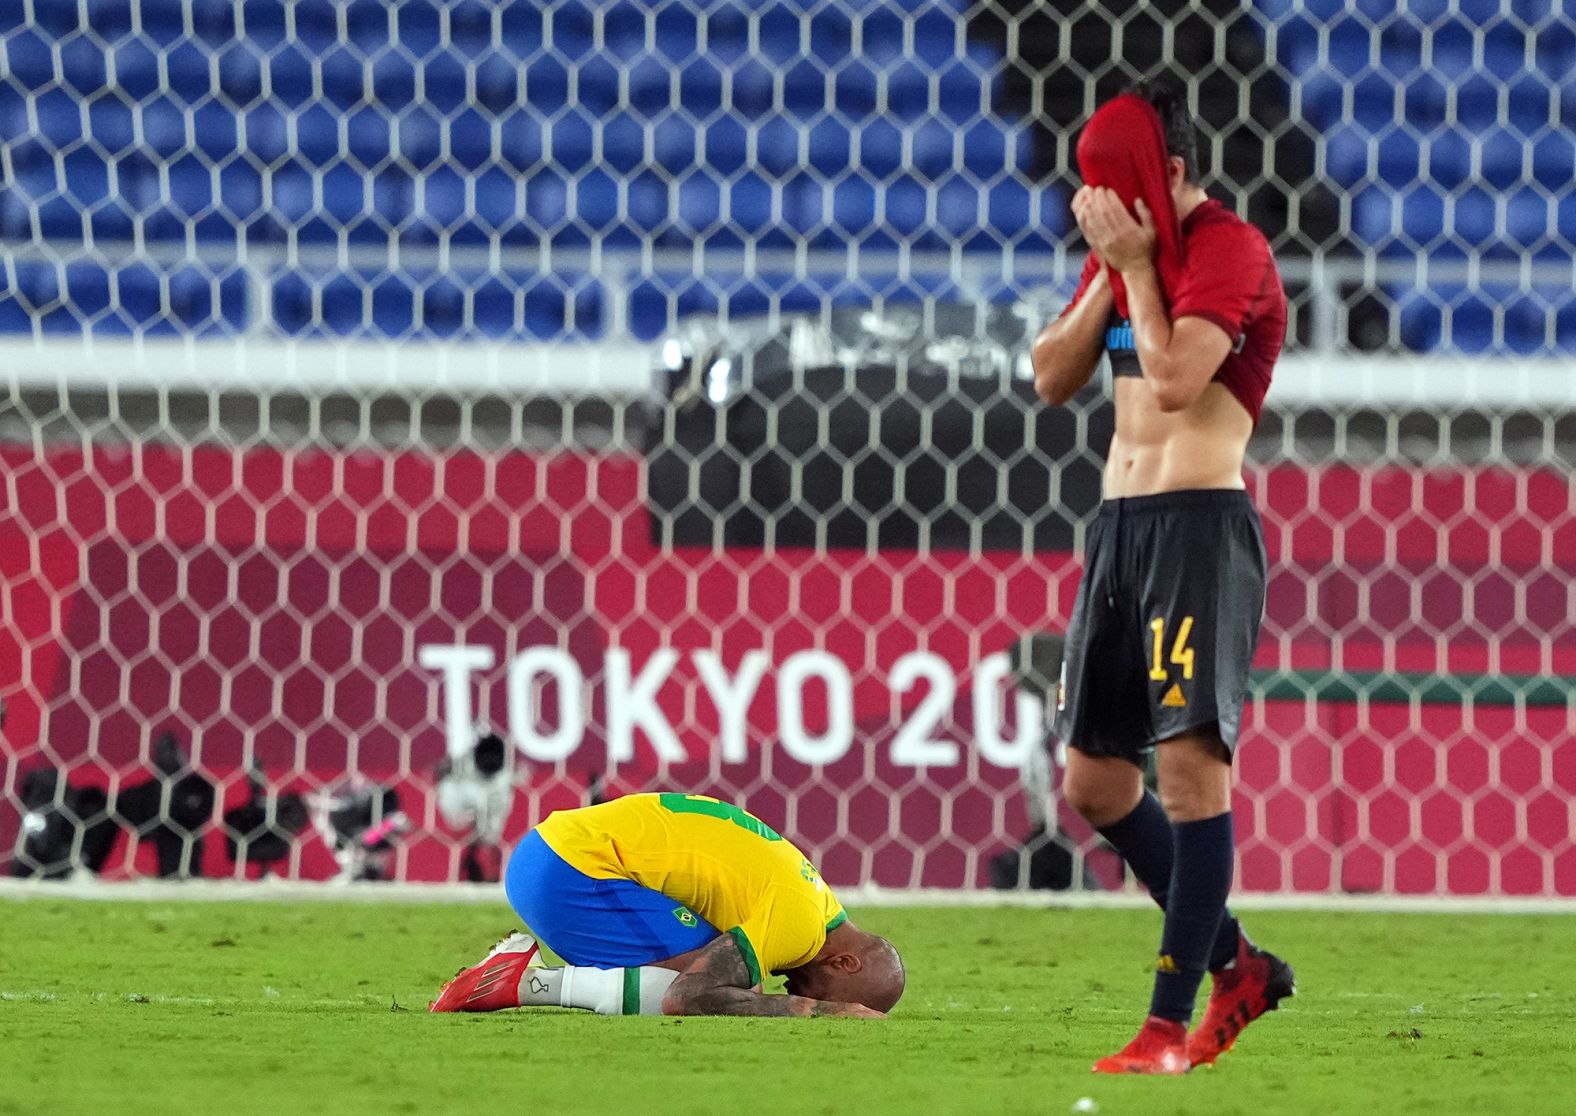 Brazilian defender Dani Alves, left, and Spanish midfielder Carlos Soler react after <a href="index.php?page=&url=https%3A%2F%2Fwww.cnn.com%2Fworld%2Flive-news%2Ftokyo-2020-olympics-08-07-21-spt%2Fh_bbe049a5800eb5f90d4e598956a6dd58" target="_blank">Brazil defeated Spain</a> 2-1 in the gold-medal football match on August 7. Brazil is the fifth men's team in history to win back-to-back titles at the Olympics.